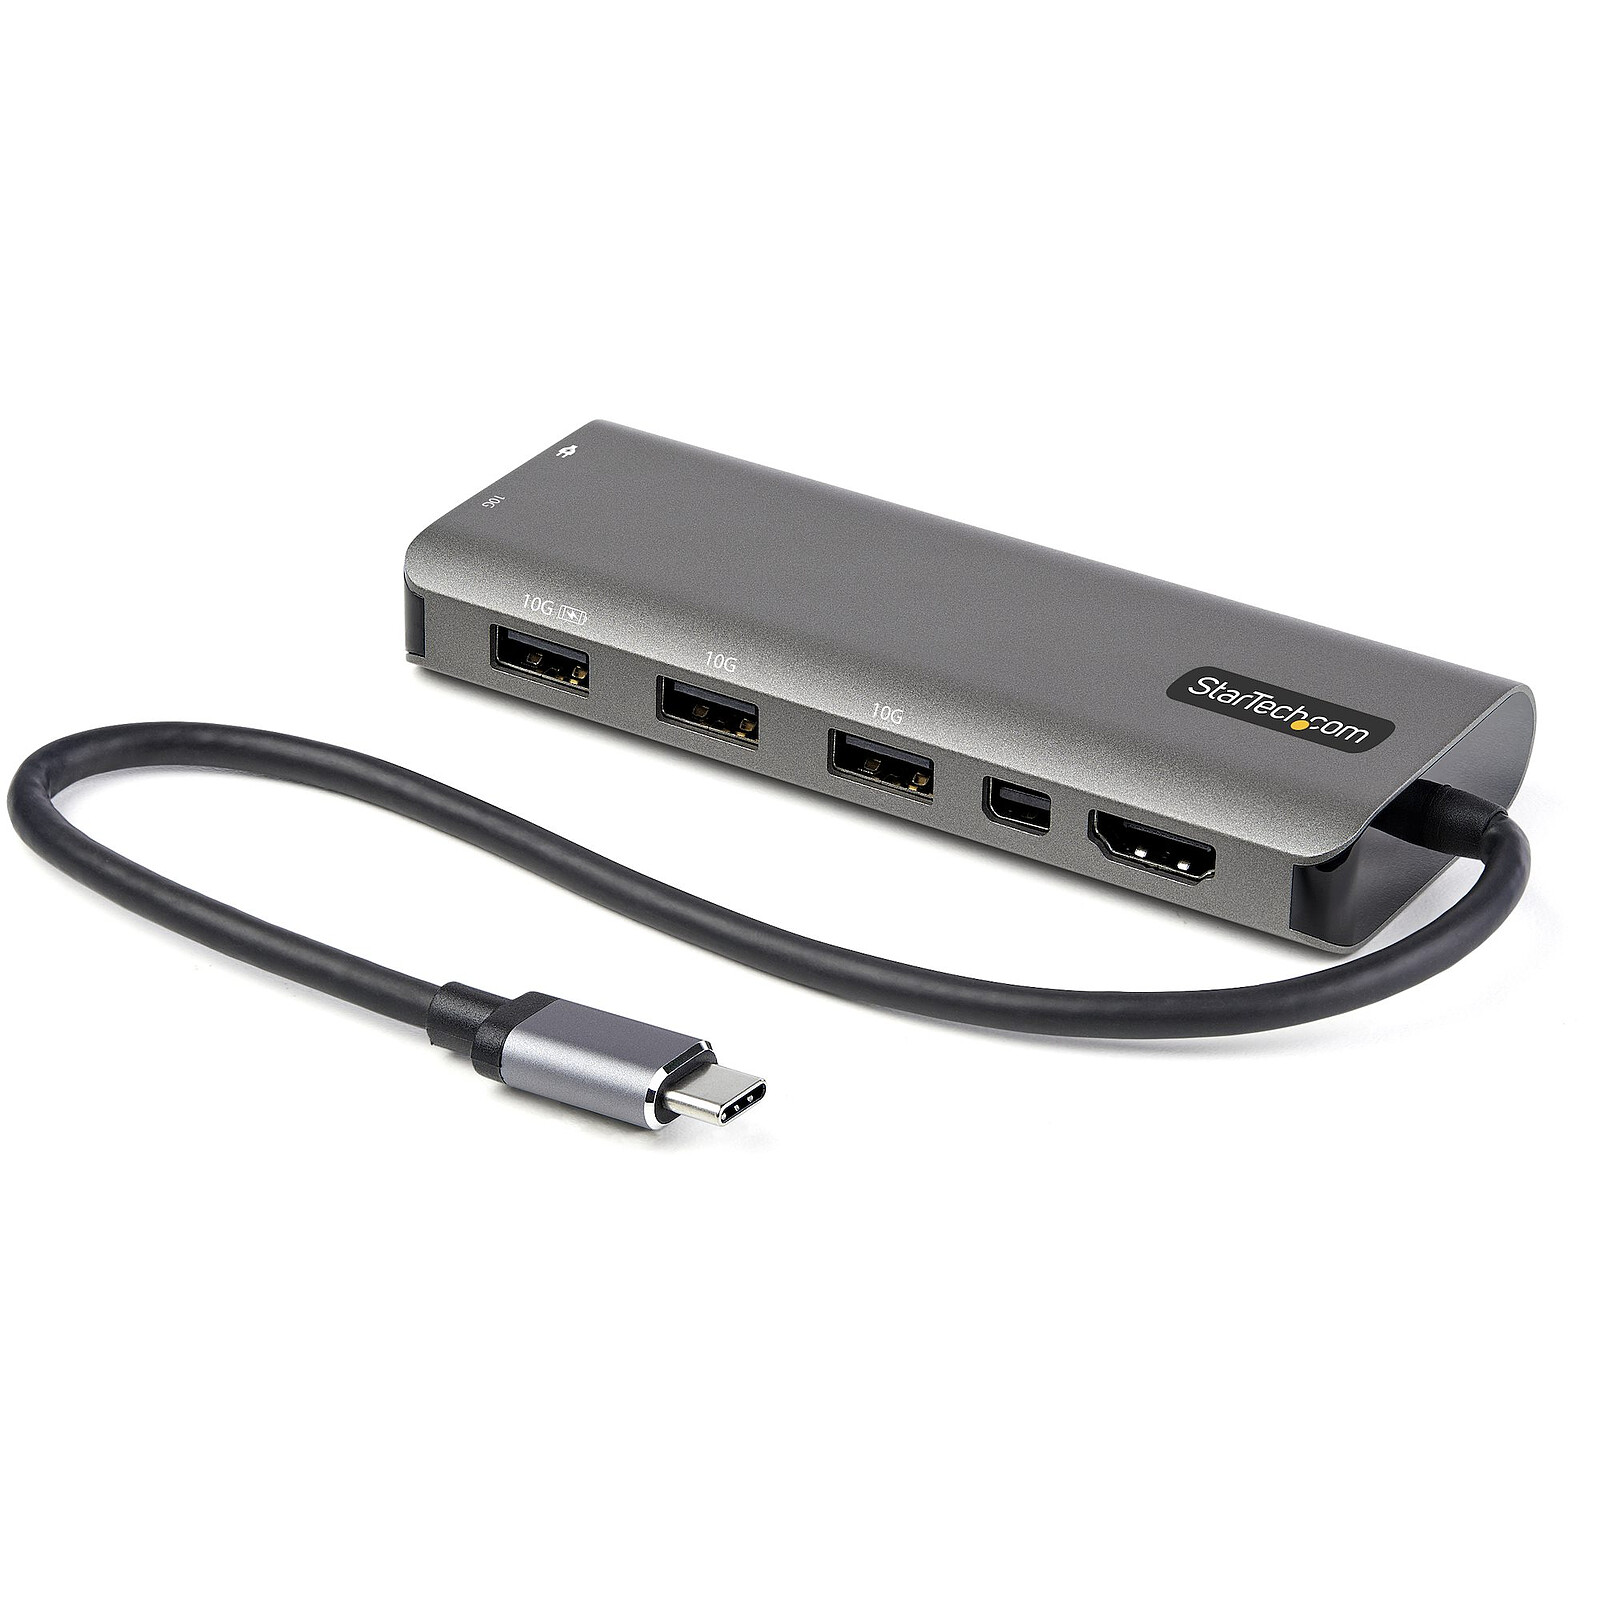 verwerken Controle Eed StarTech.com Multiport USB-C Adapter with HDMI or Mini DisplayPort 4K 60Hz,  4-port USB Hub and 100W Power Delivery - Laptop docking station  StarTech.com on LDLC